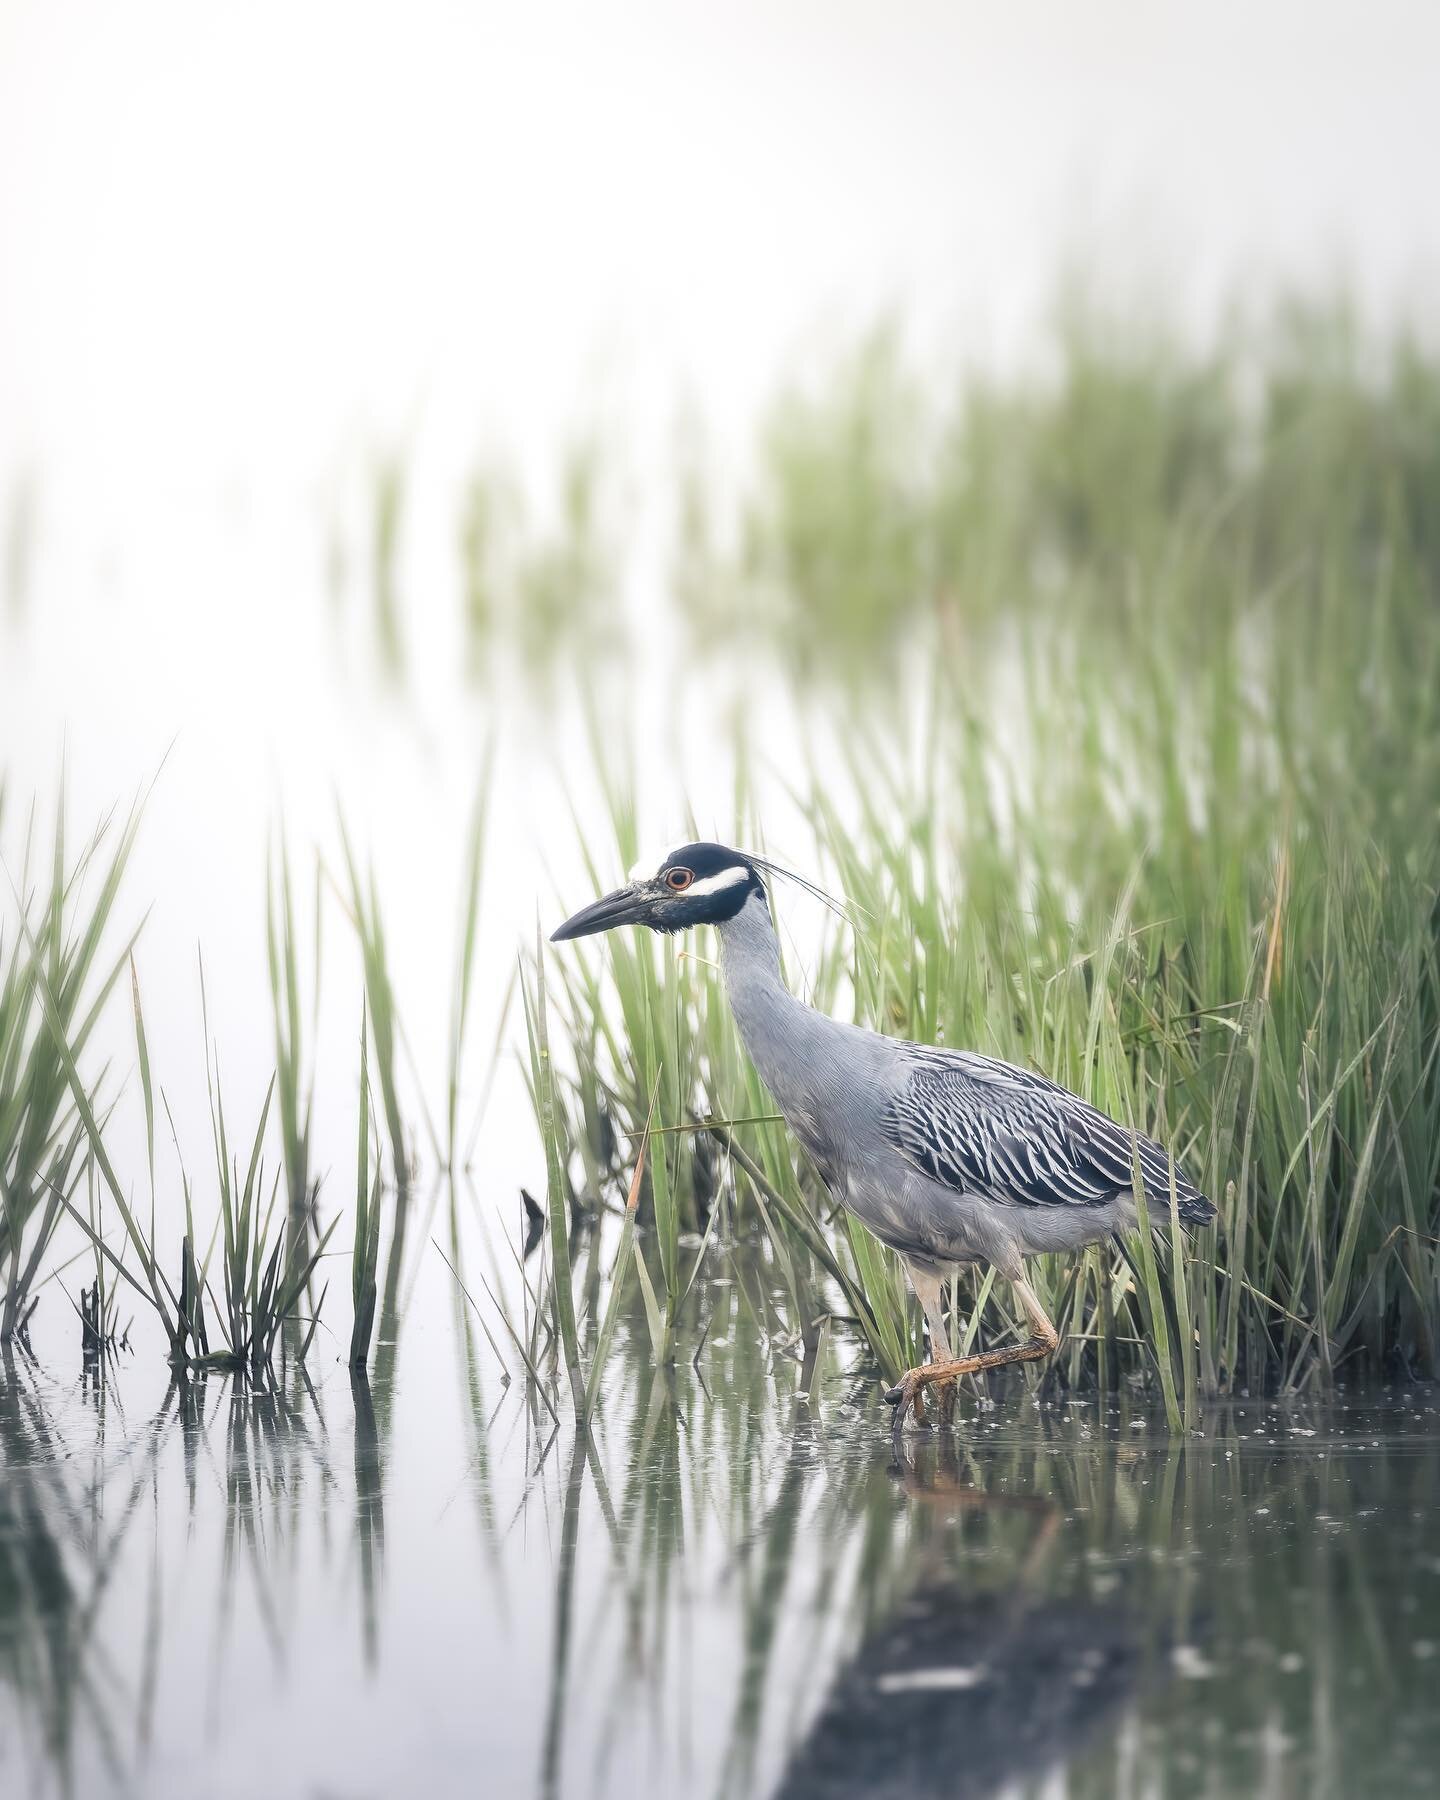 The yellow capped night heron, not at night.